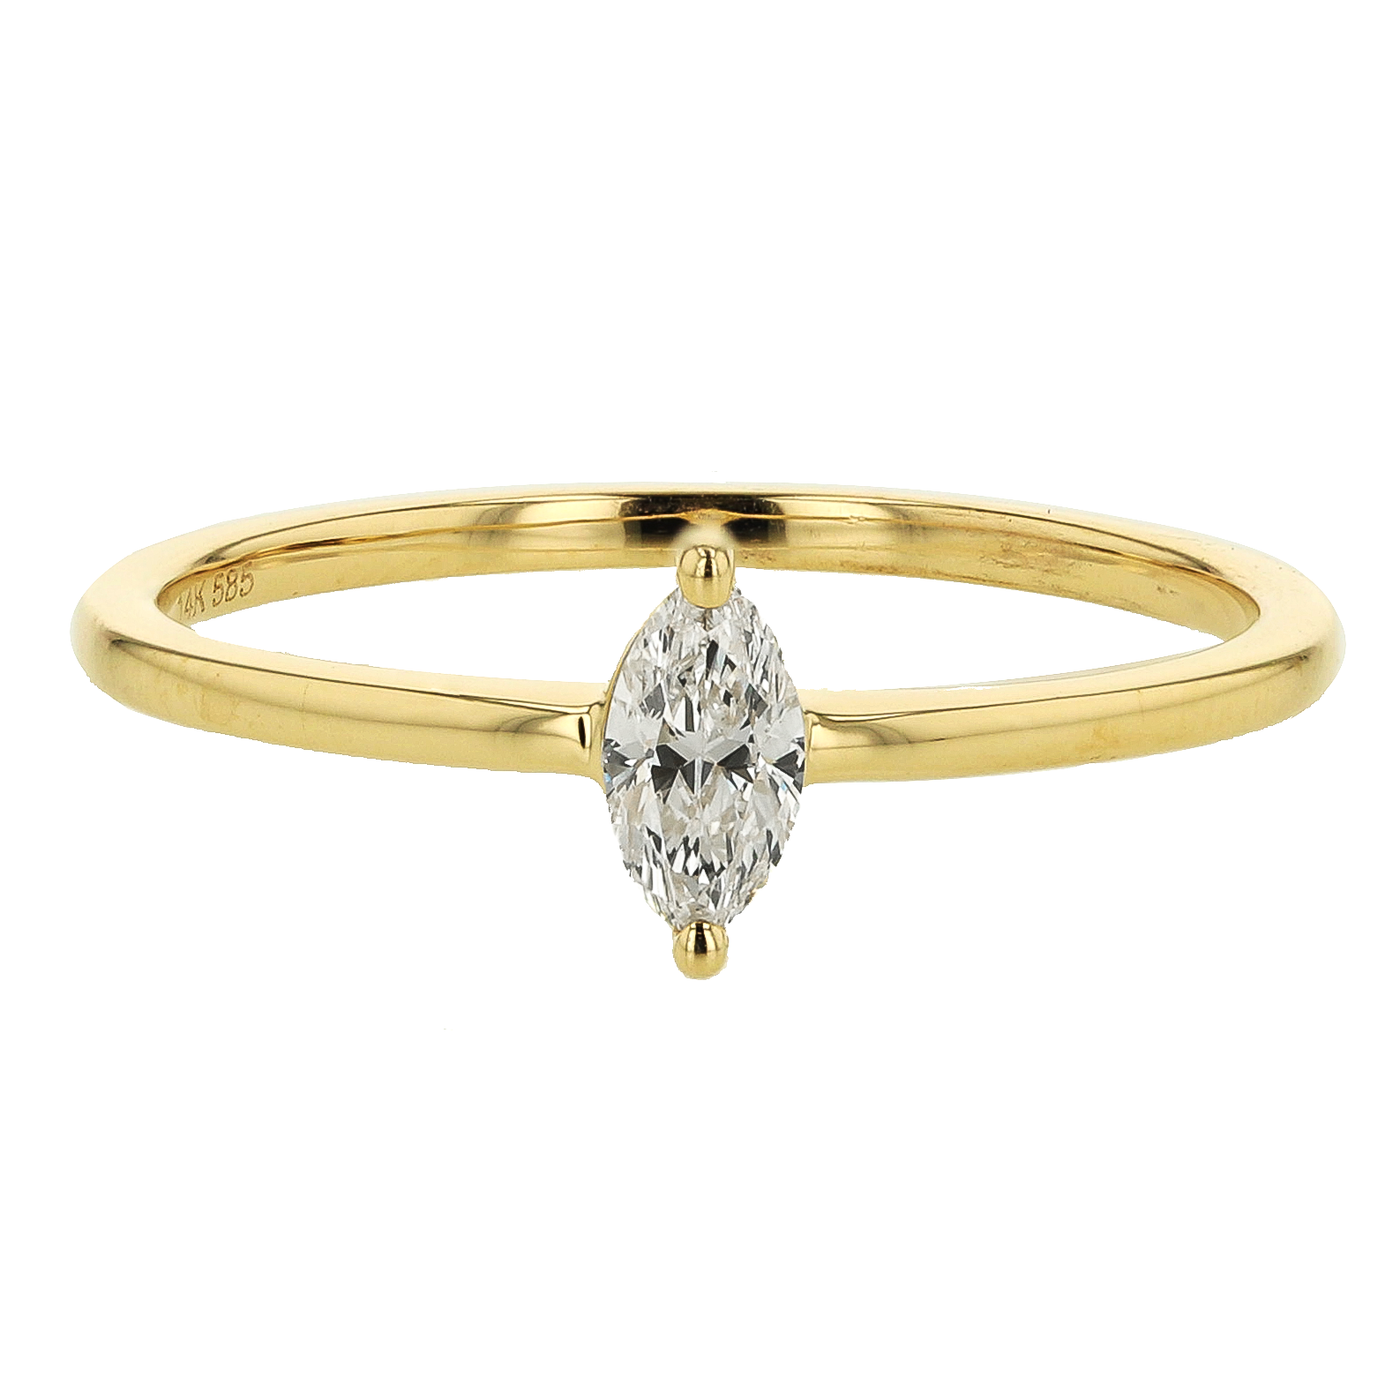 0.25 CTTW Marquise Cut Diamond Ring in 14K Yellow Gold